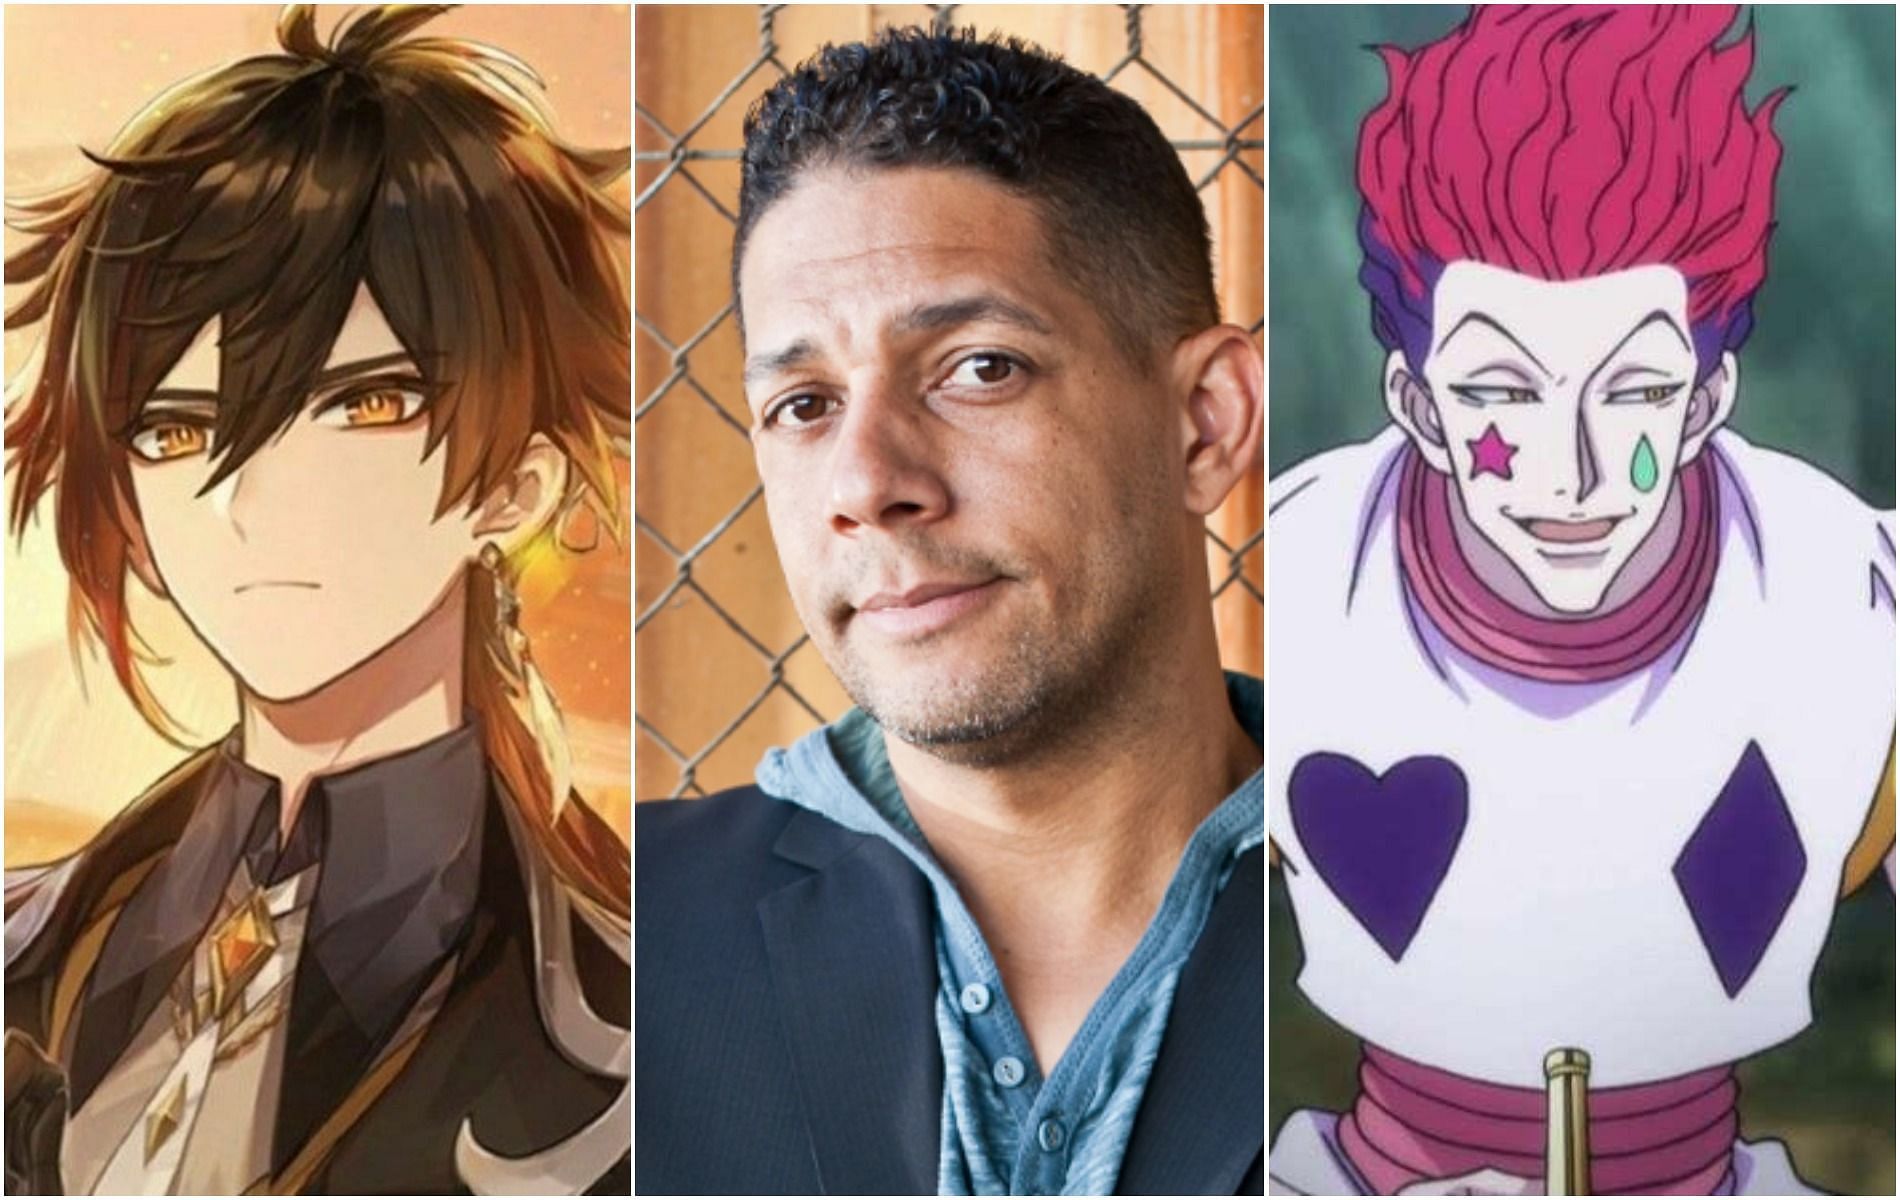 5 characters voiced by Genshin Impact&rsquo;s Keith Silverstein (Images via Genshin Impact, HunterxHunter, and mn2s)